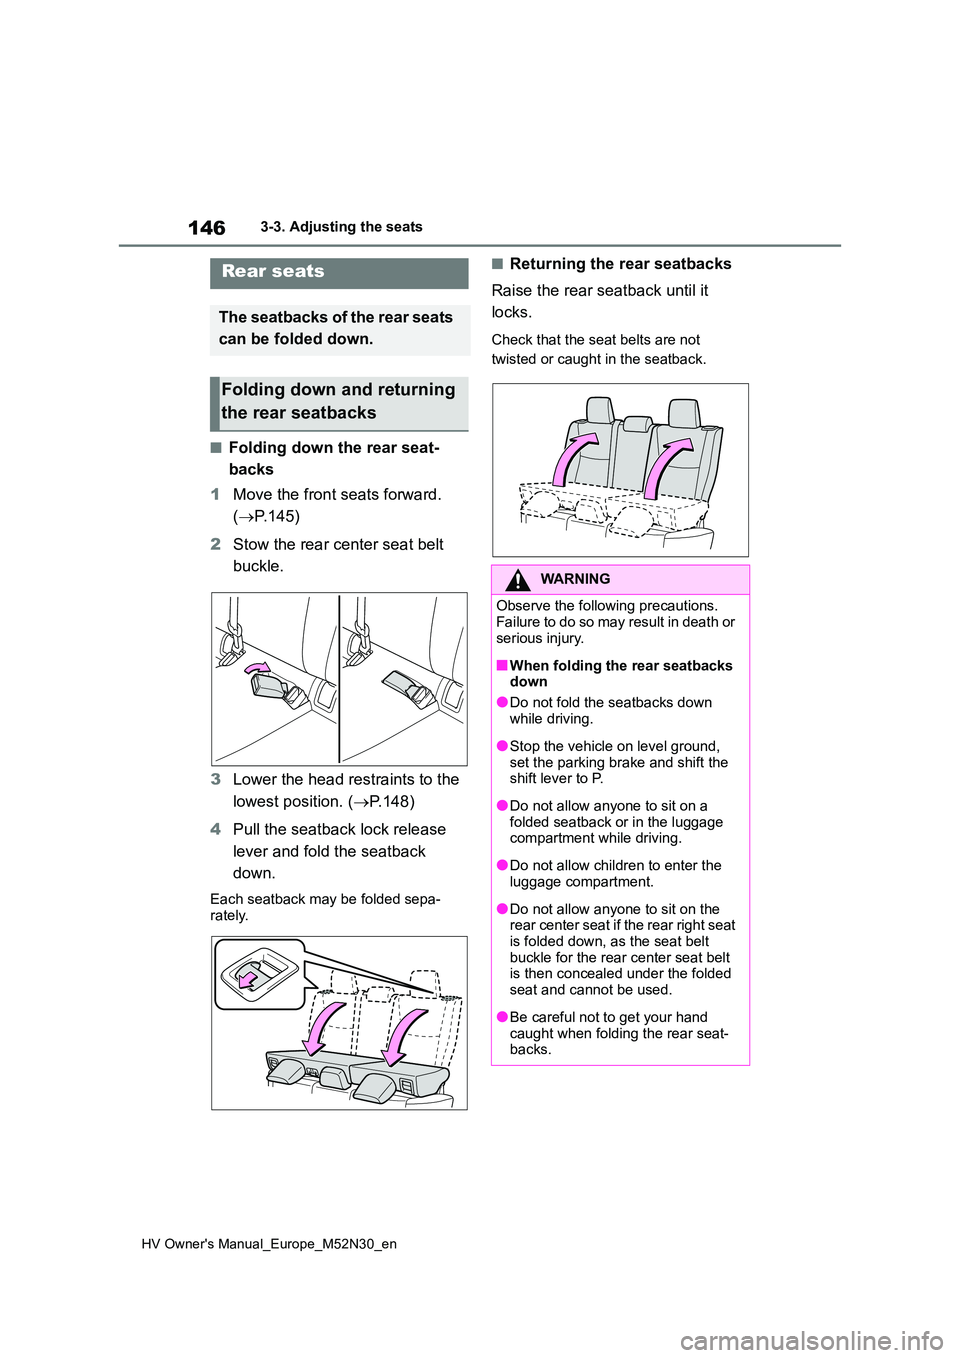 TOYOTA YARIS 2022 Owners Guide 146
HV Owner's Manual_Europe_M52N30_en
3-3. Adjusting the seats
■Folding down the rear seat- 
backs 
1 Move the front seats forward.  
( P.145) 
2 Stow the rear center seat belt  
buckle. 
3 